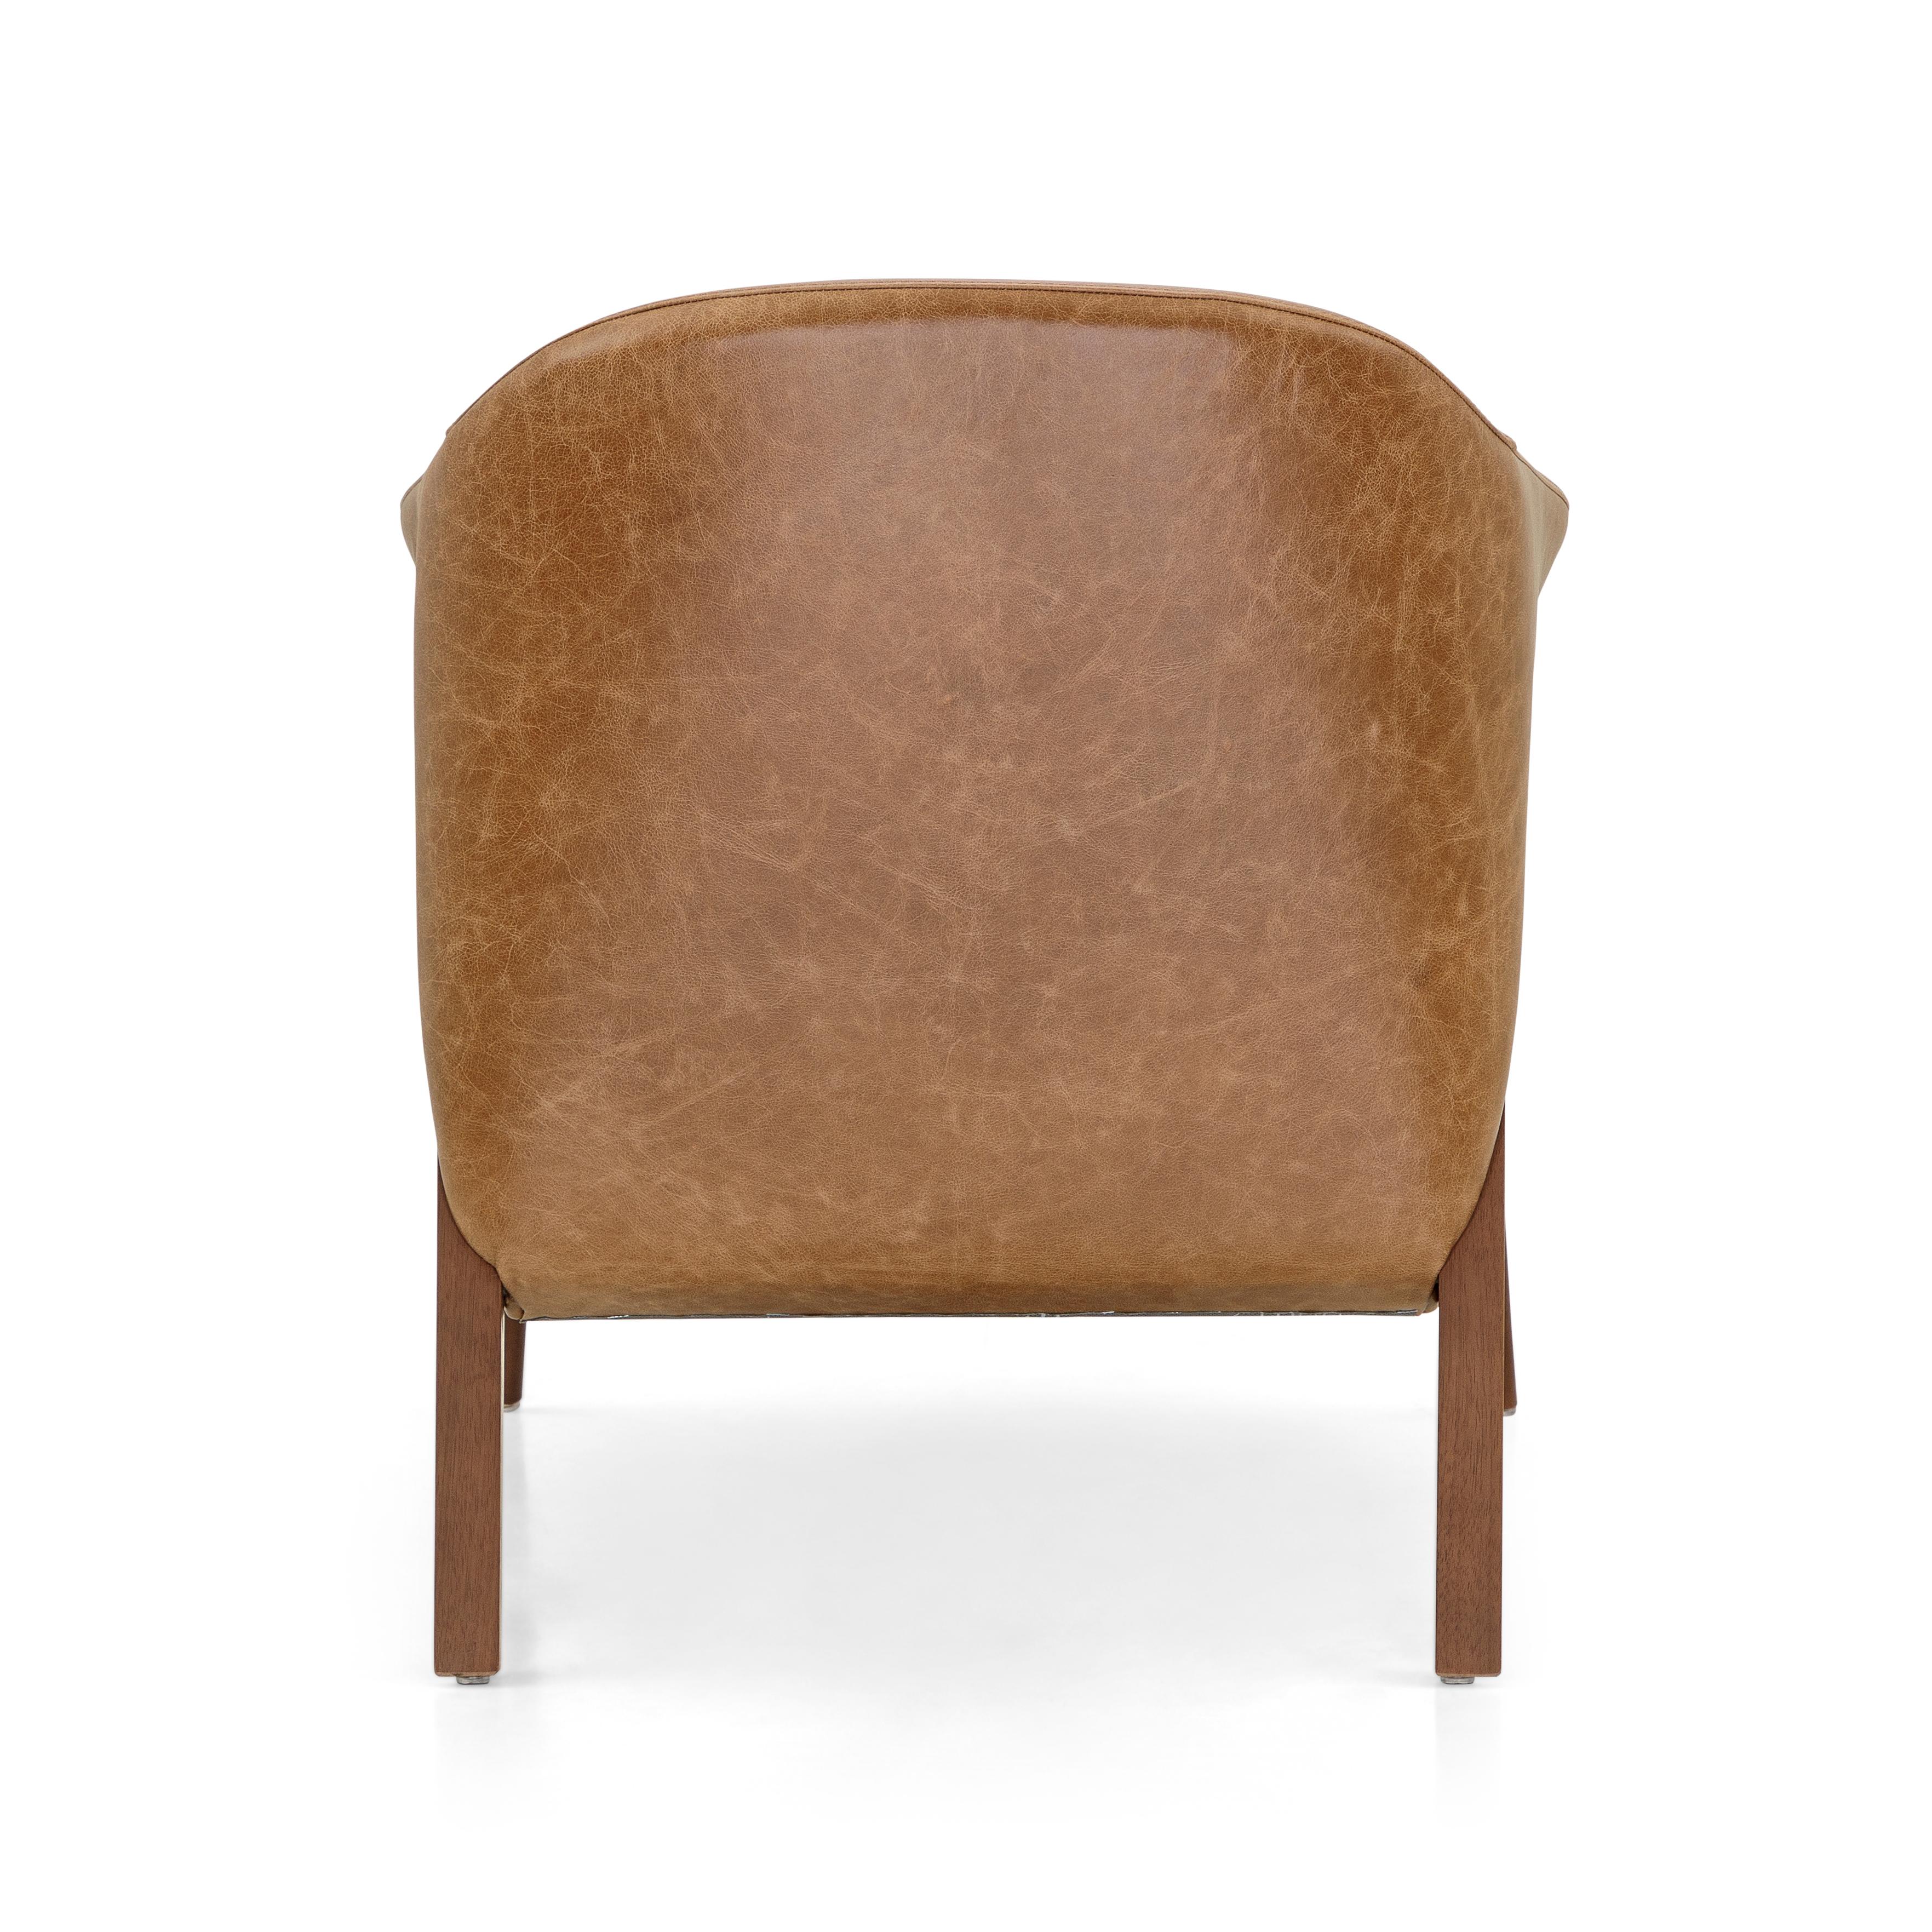 Osa Upholstered Curve Back Armchair in Walnut Wood Finish and Brown Leather In New Condition For Sale In Miami, FL